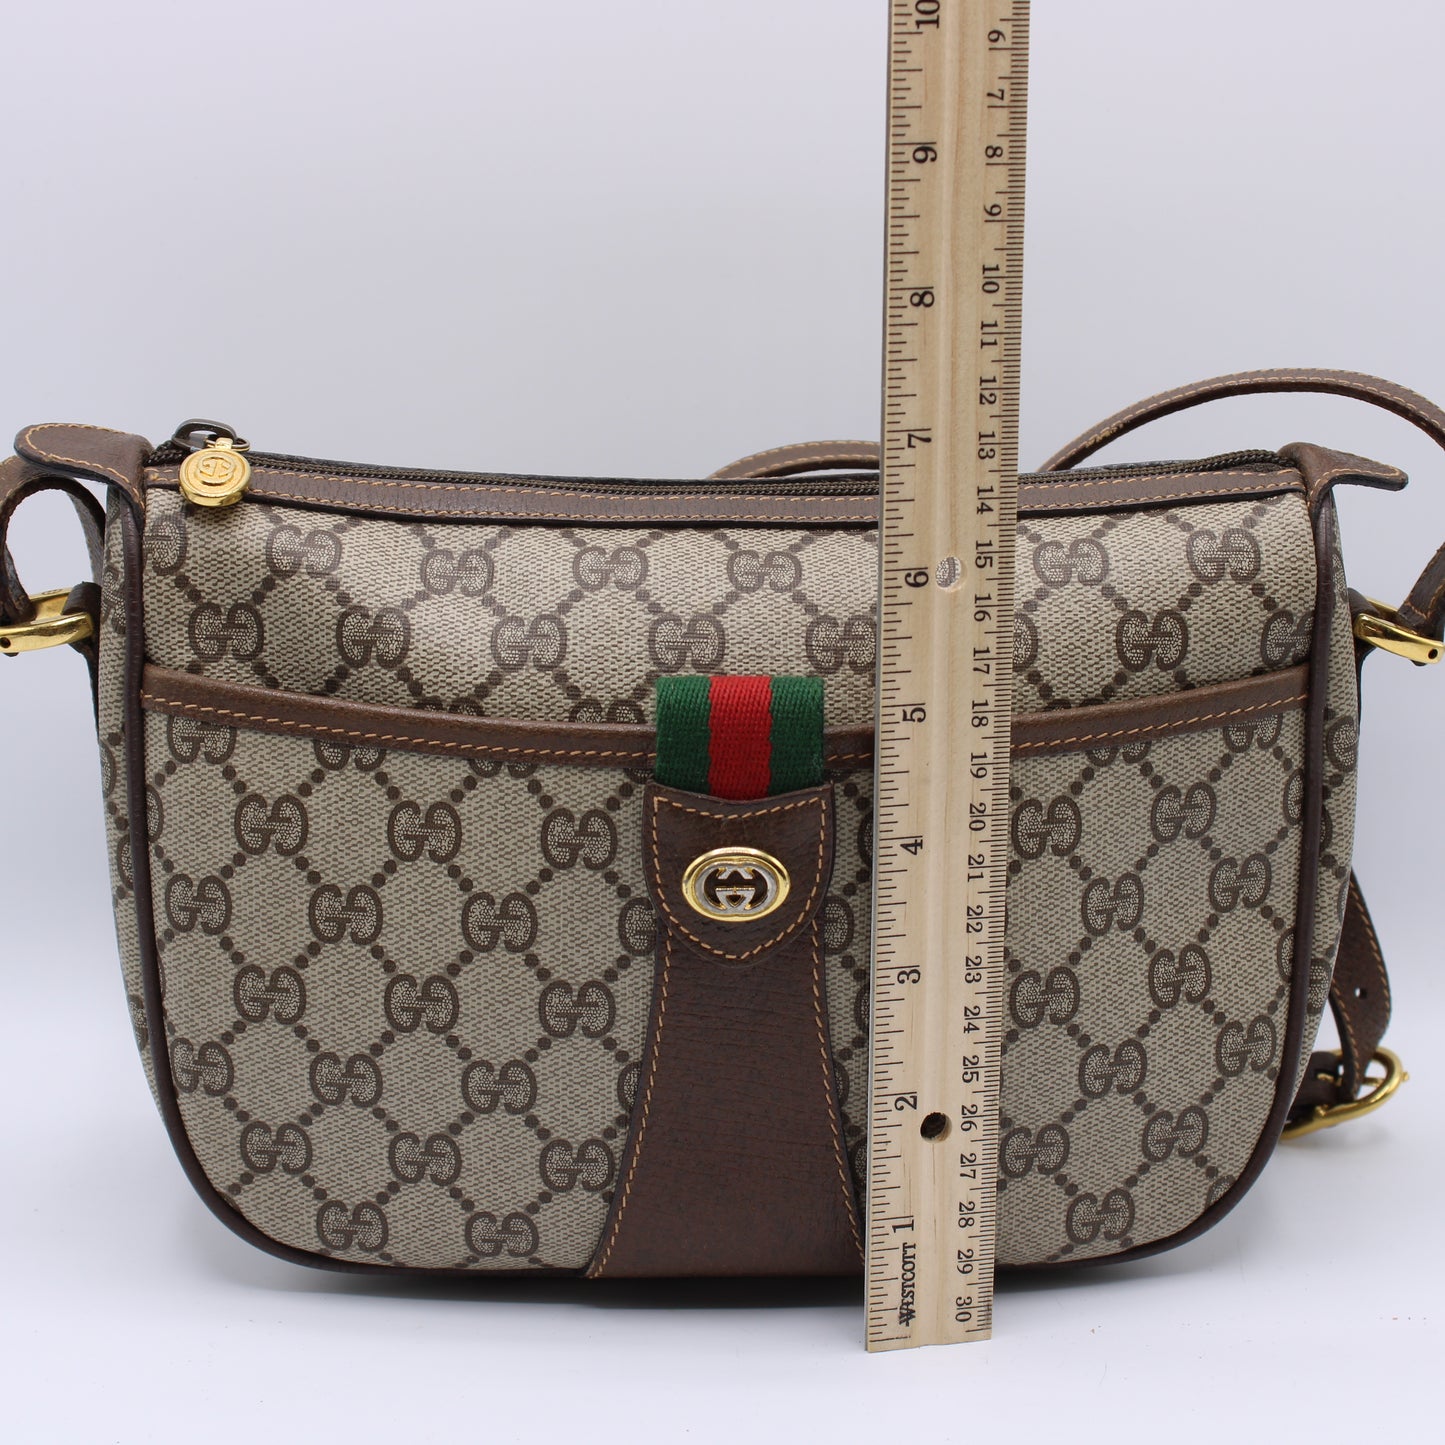 Gucci Supreme Ophidia GG Canvas Brown Leather Trim Crossbody Bag Vintage